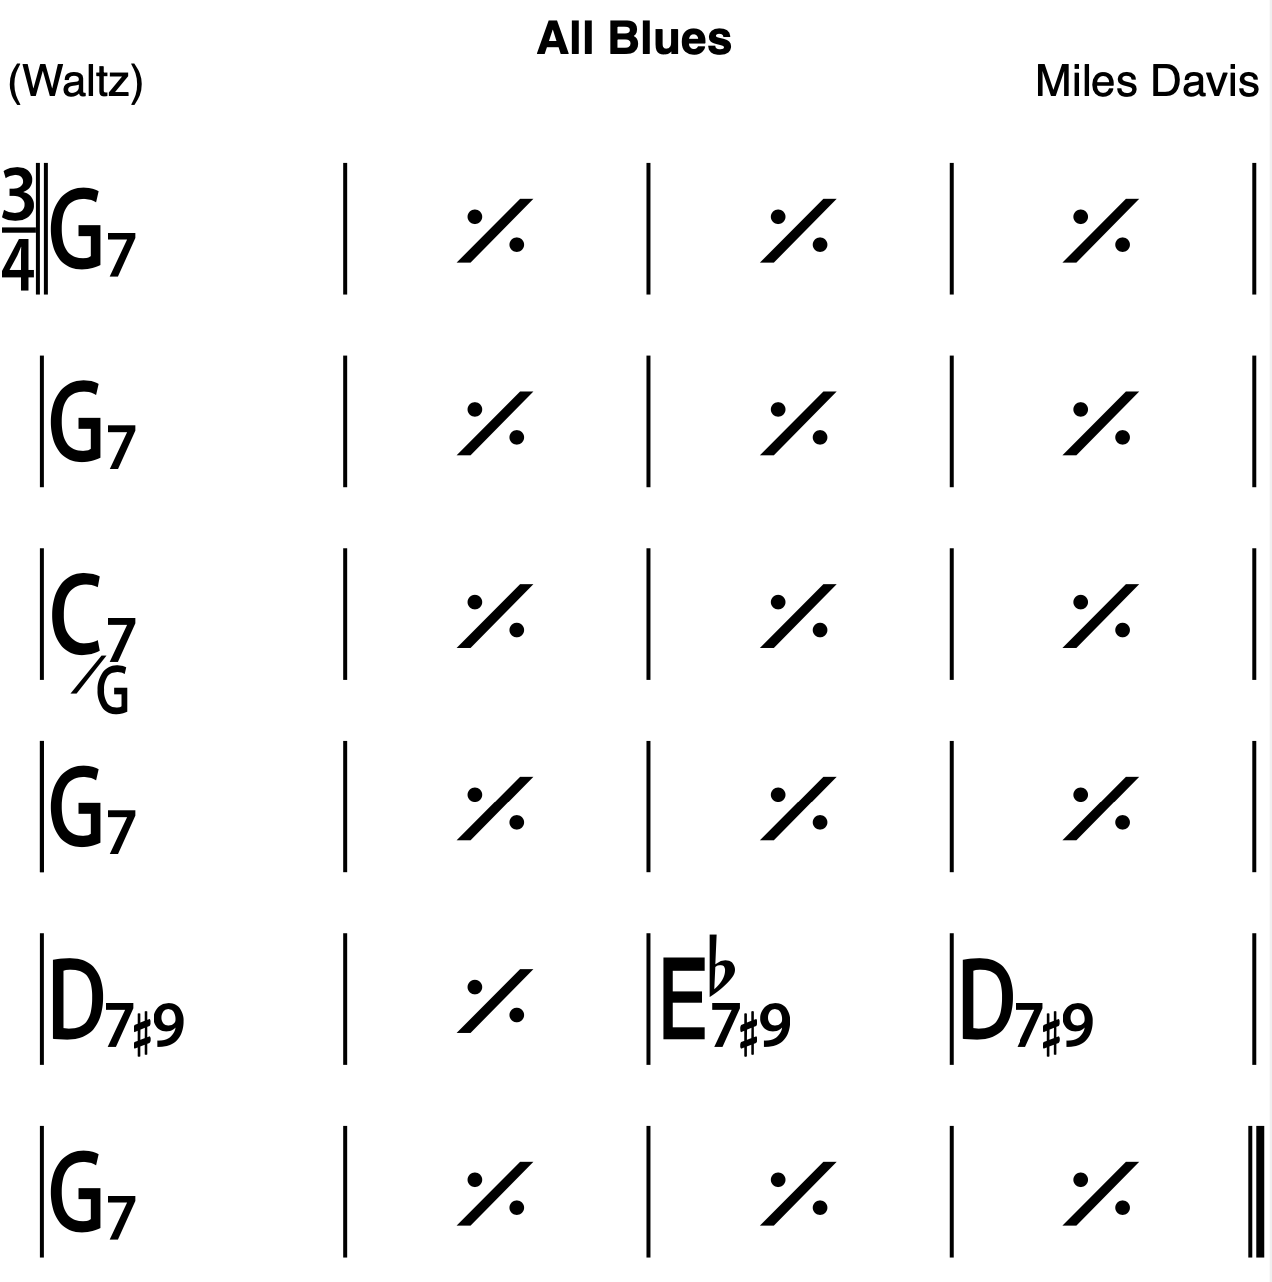 Blues Styles: Blues in 3/4 or 6/8 Time